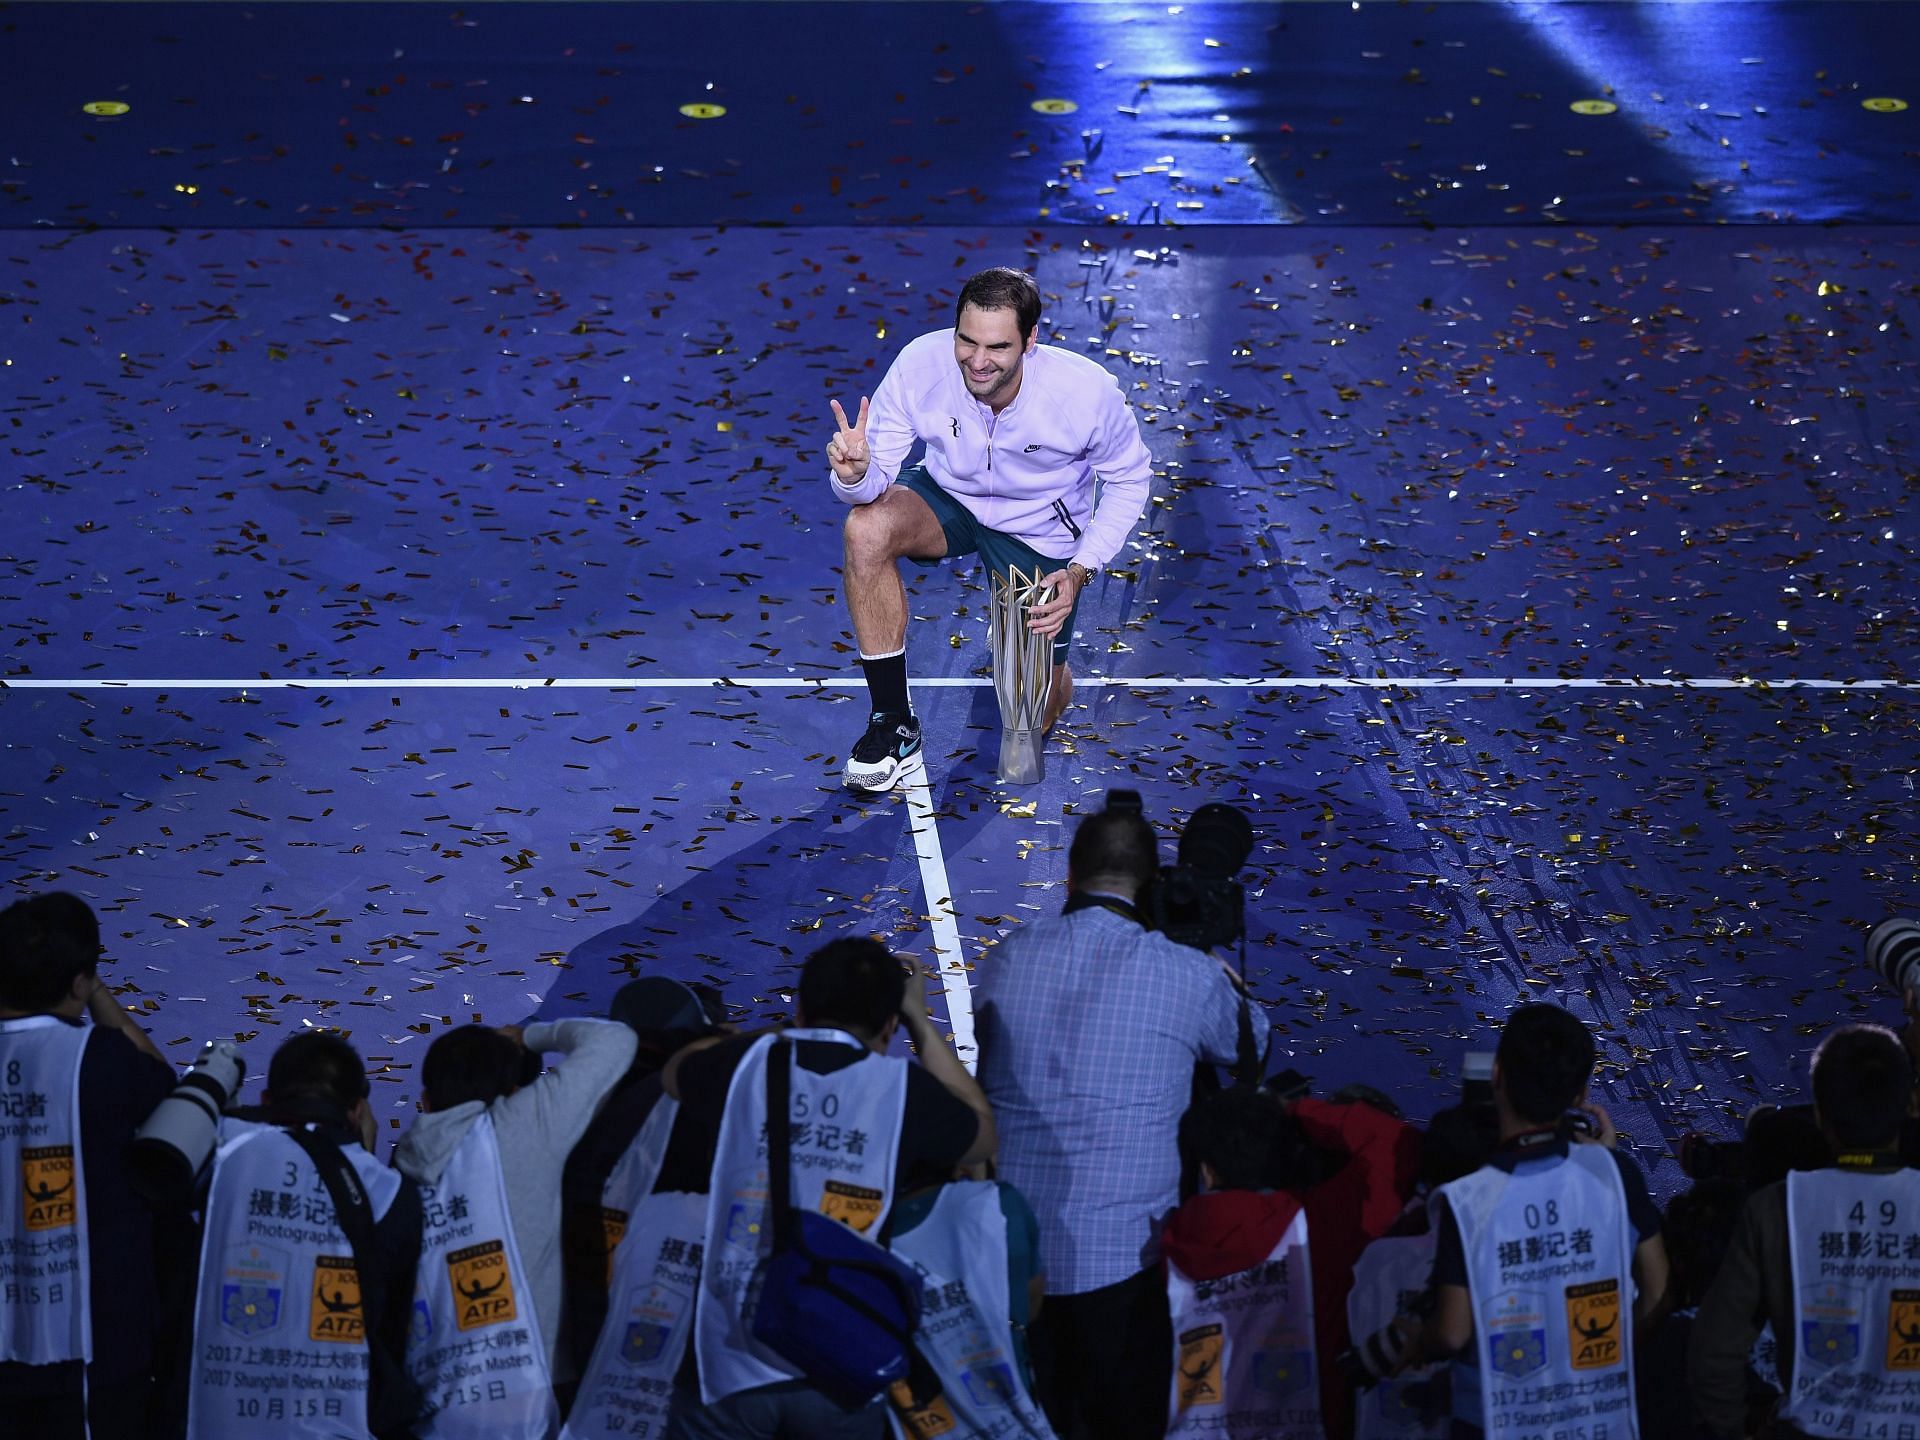 Roger Federer after winning the Shanghai Masters in 2017